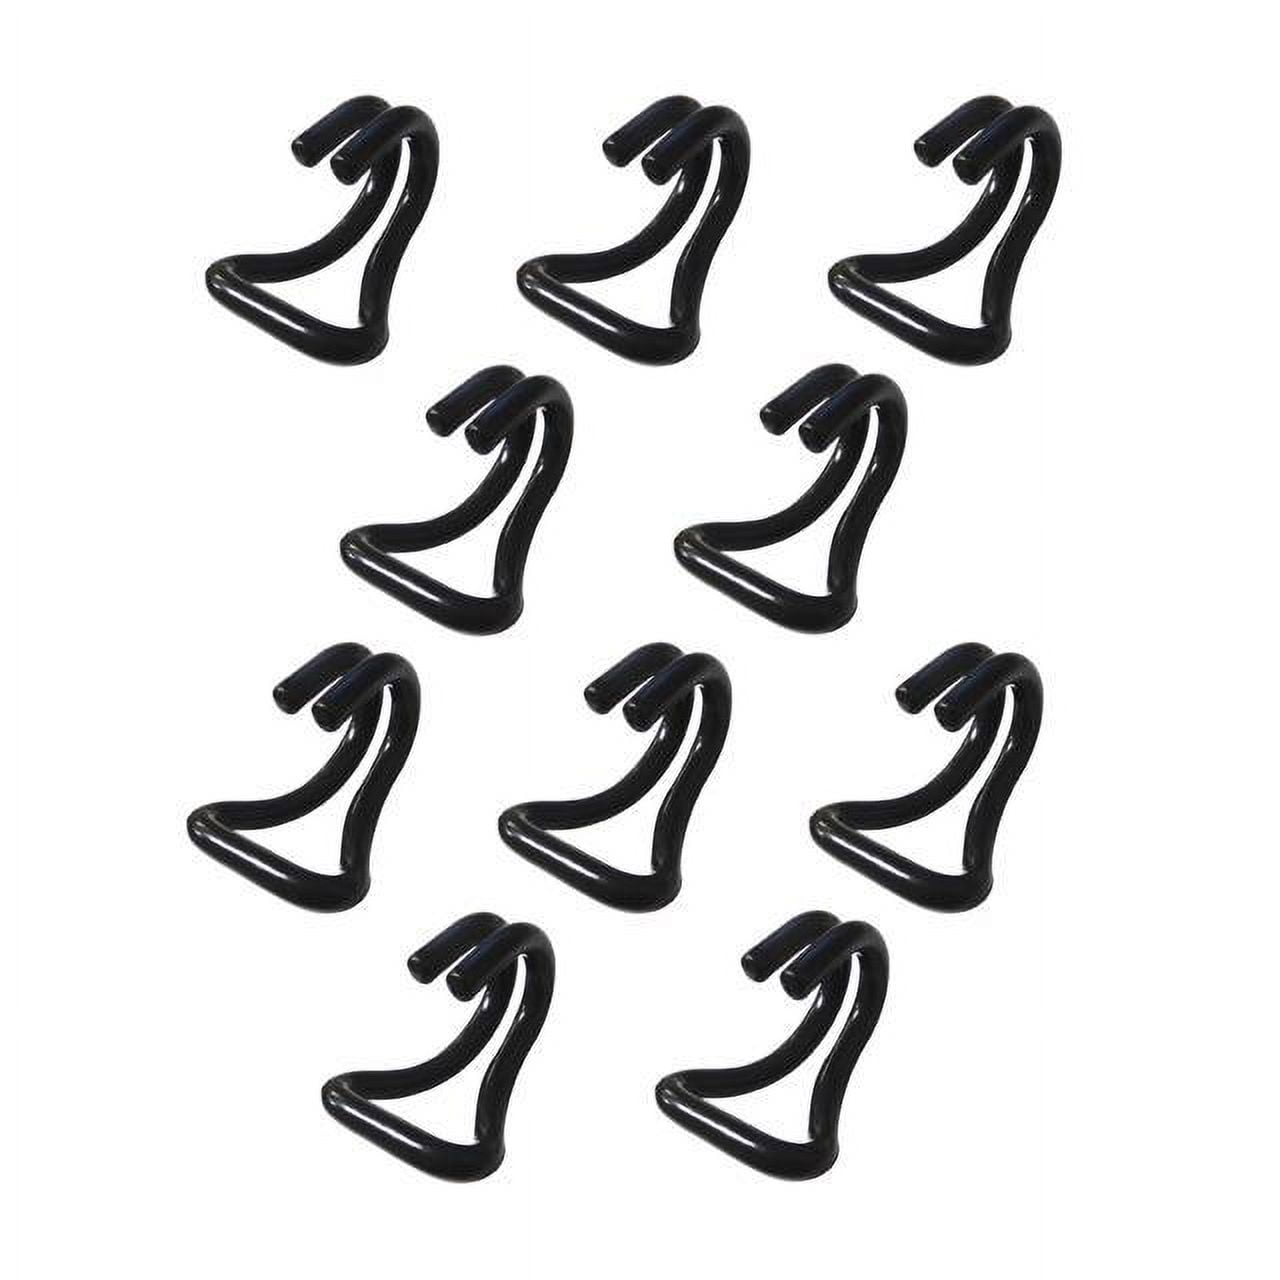 SNAP-LOC E-Track Strap Slip-On Hook Adapter 10-Pack, Logistic Tie-Down for  Pickups, Trucks, Trailers 